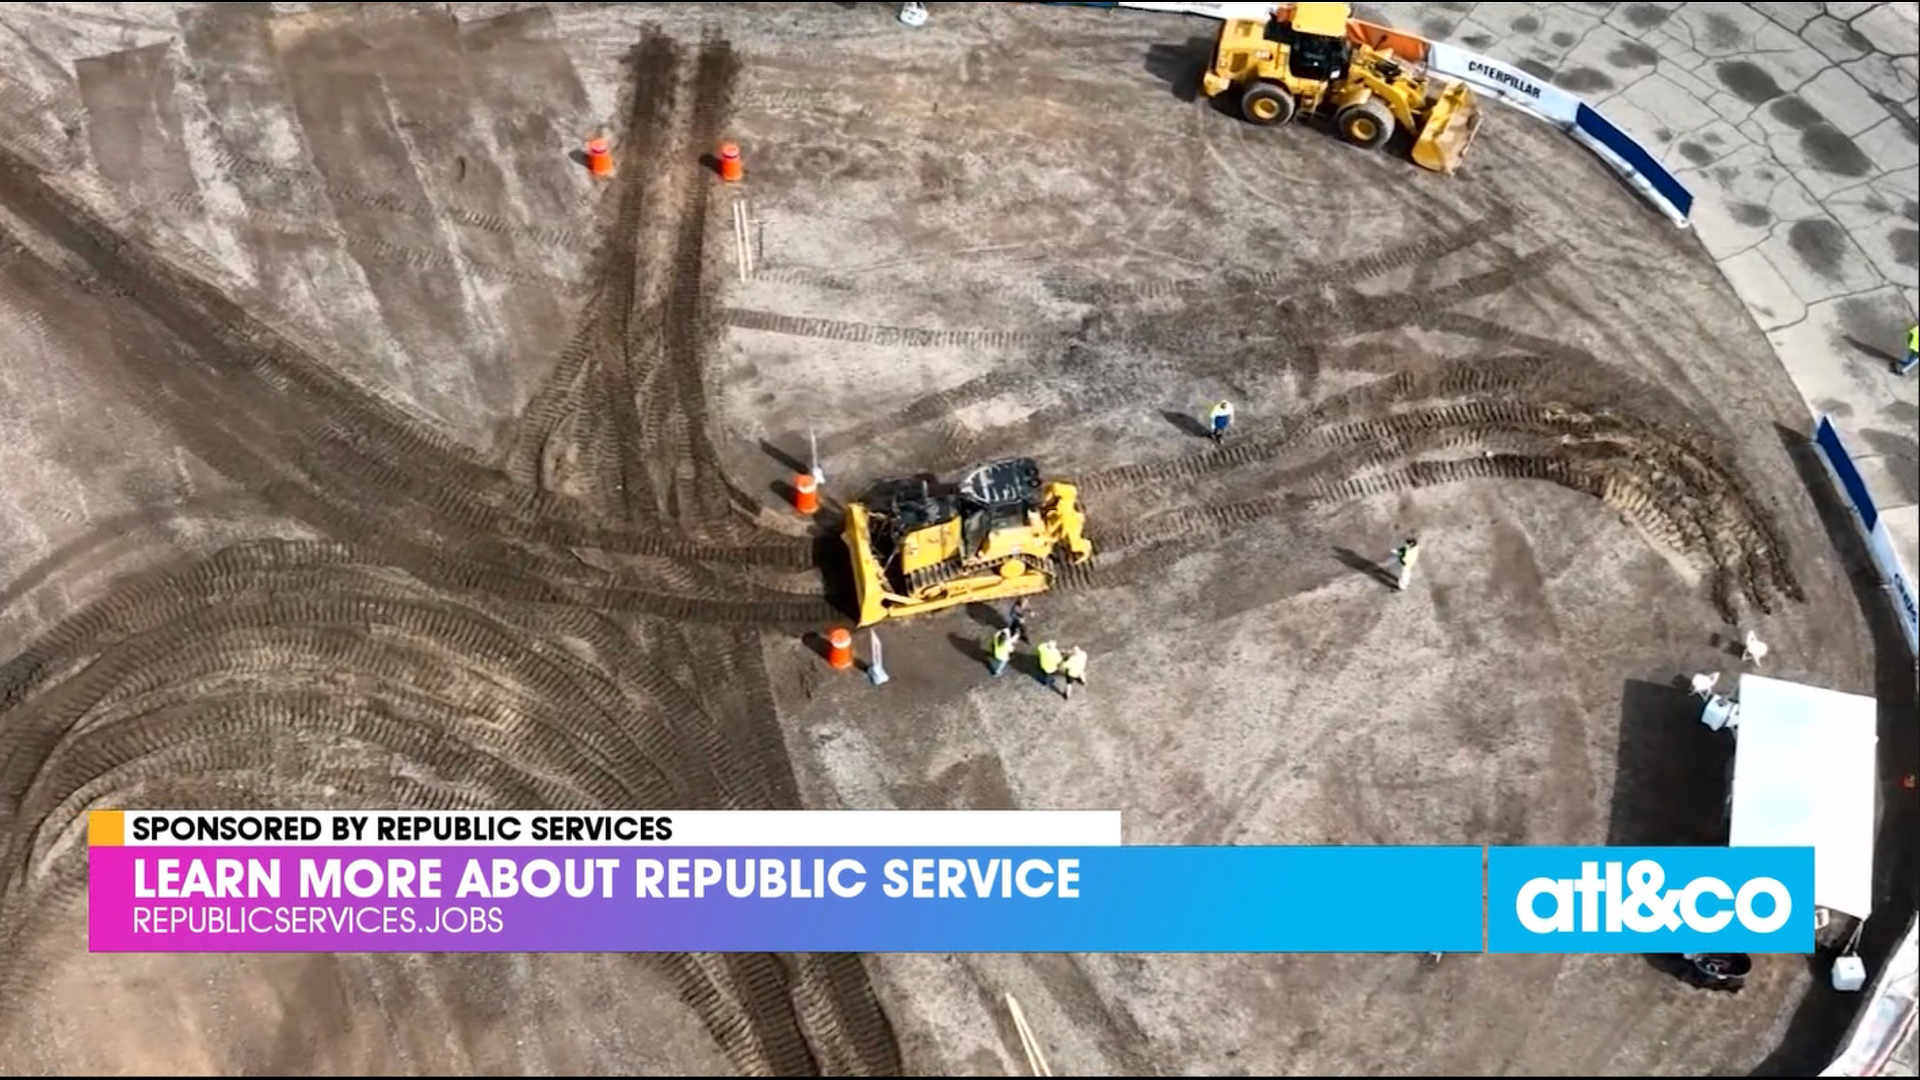 See how Republic Services is going above and beyond to make sure their workers feel appreciated.